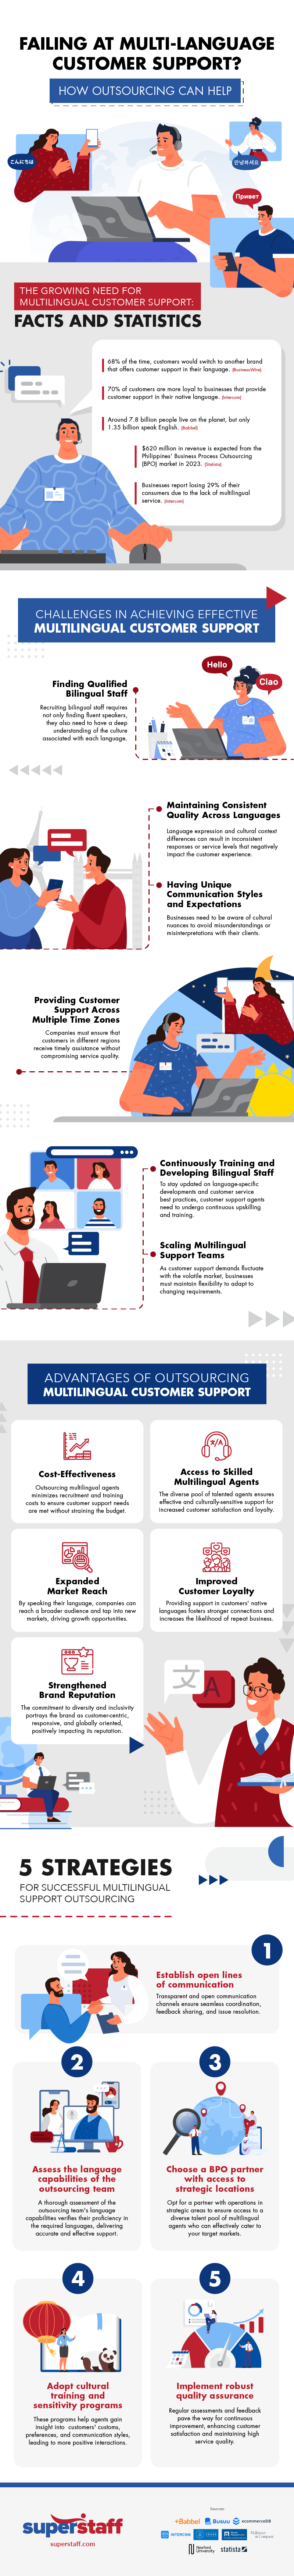 Failing at Multi-language Customer Support? How Outsourcing Can Help, infographic